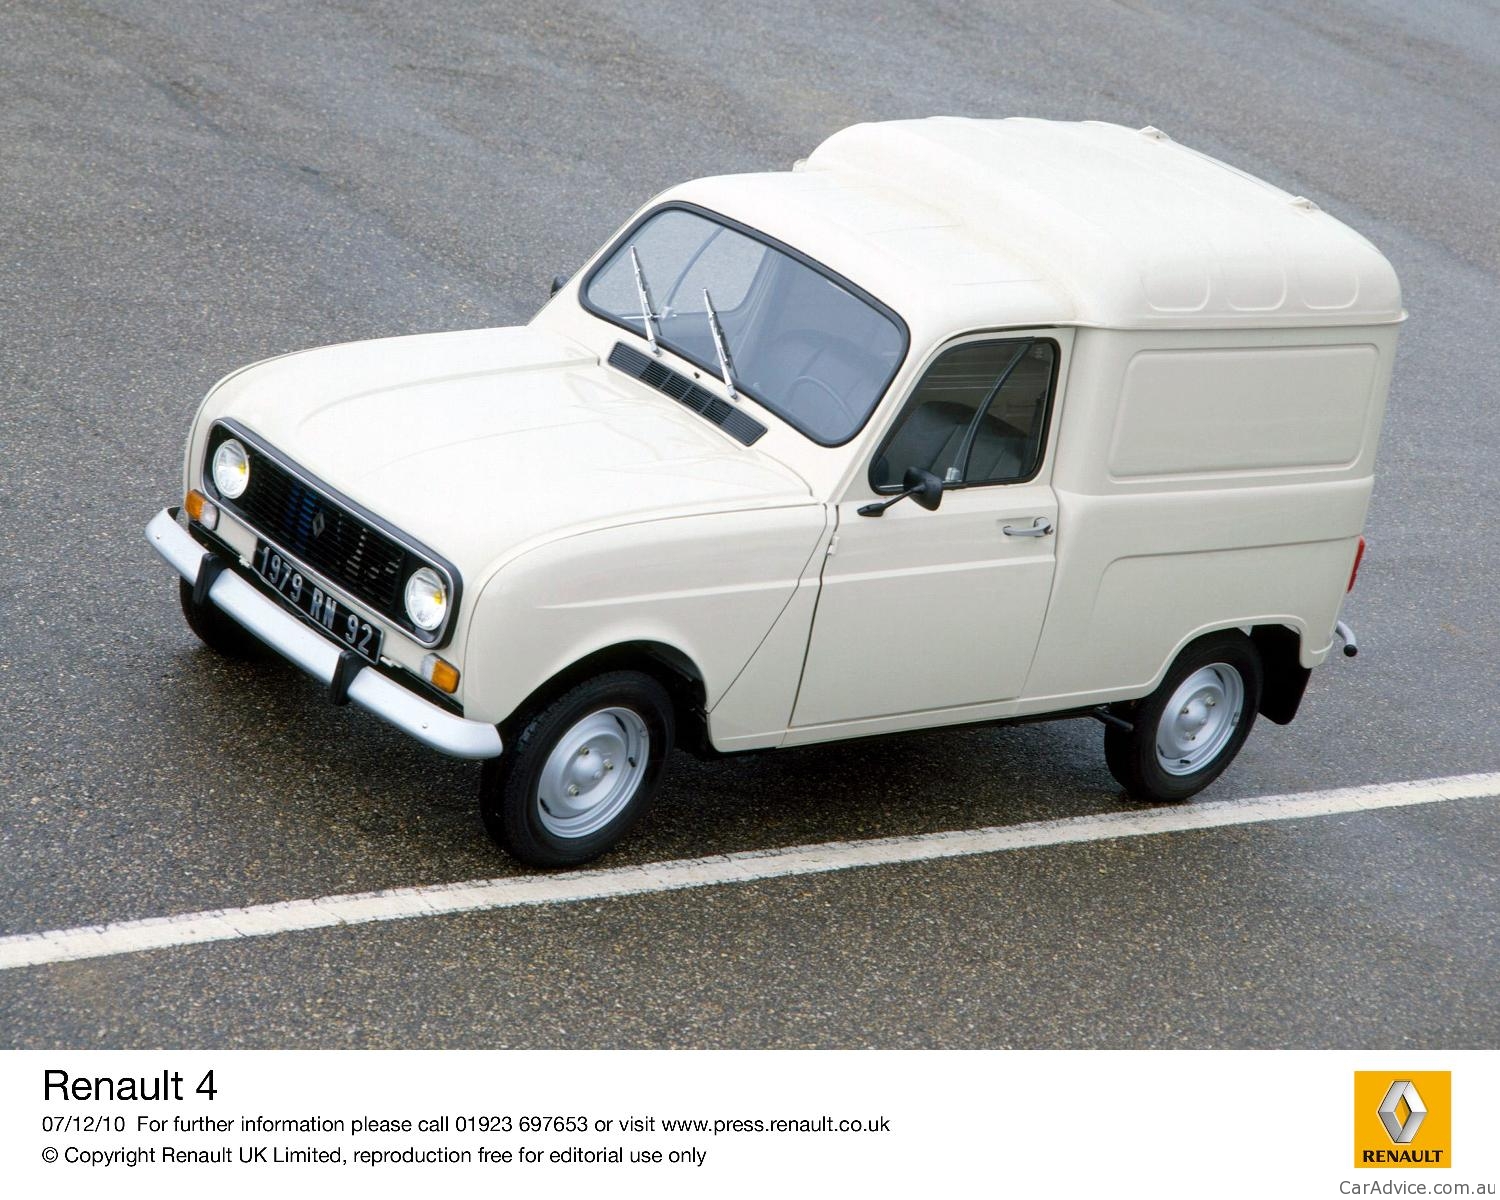 Renault 4 celebrating 50th anniversary in 2011 - Photos (1 of 10)